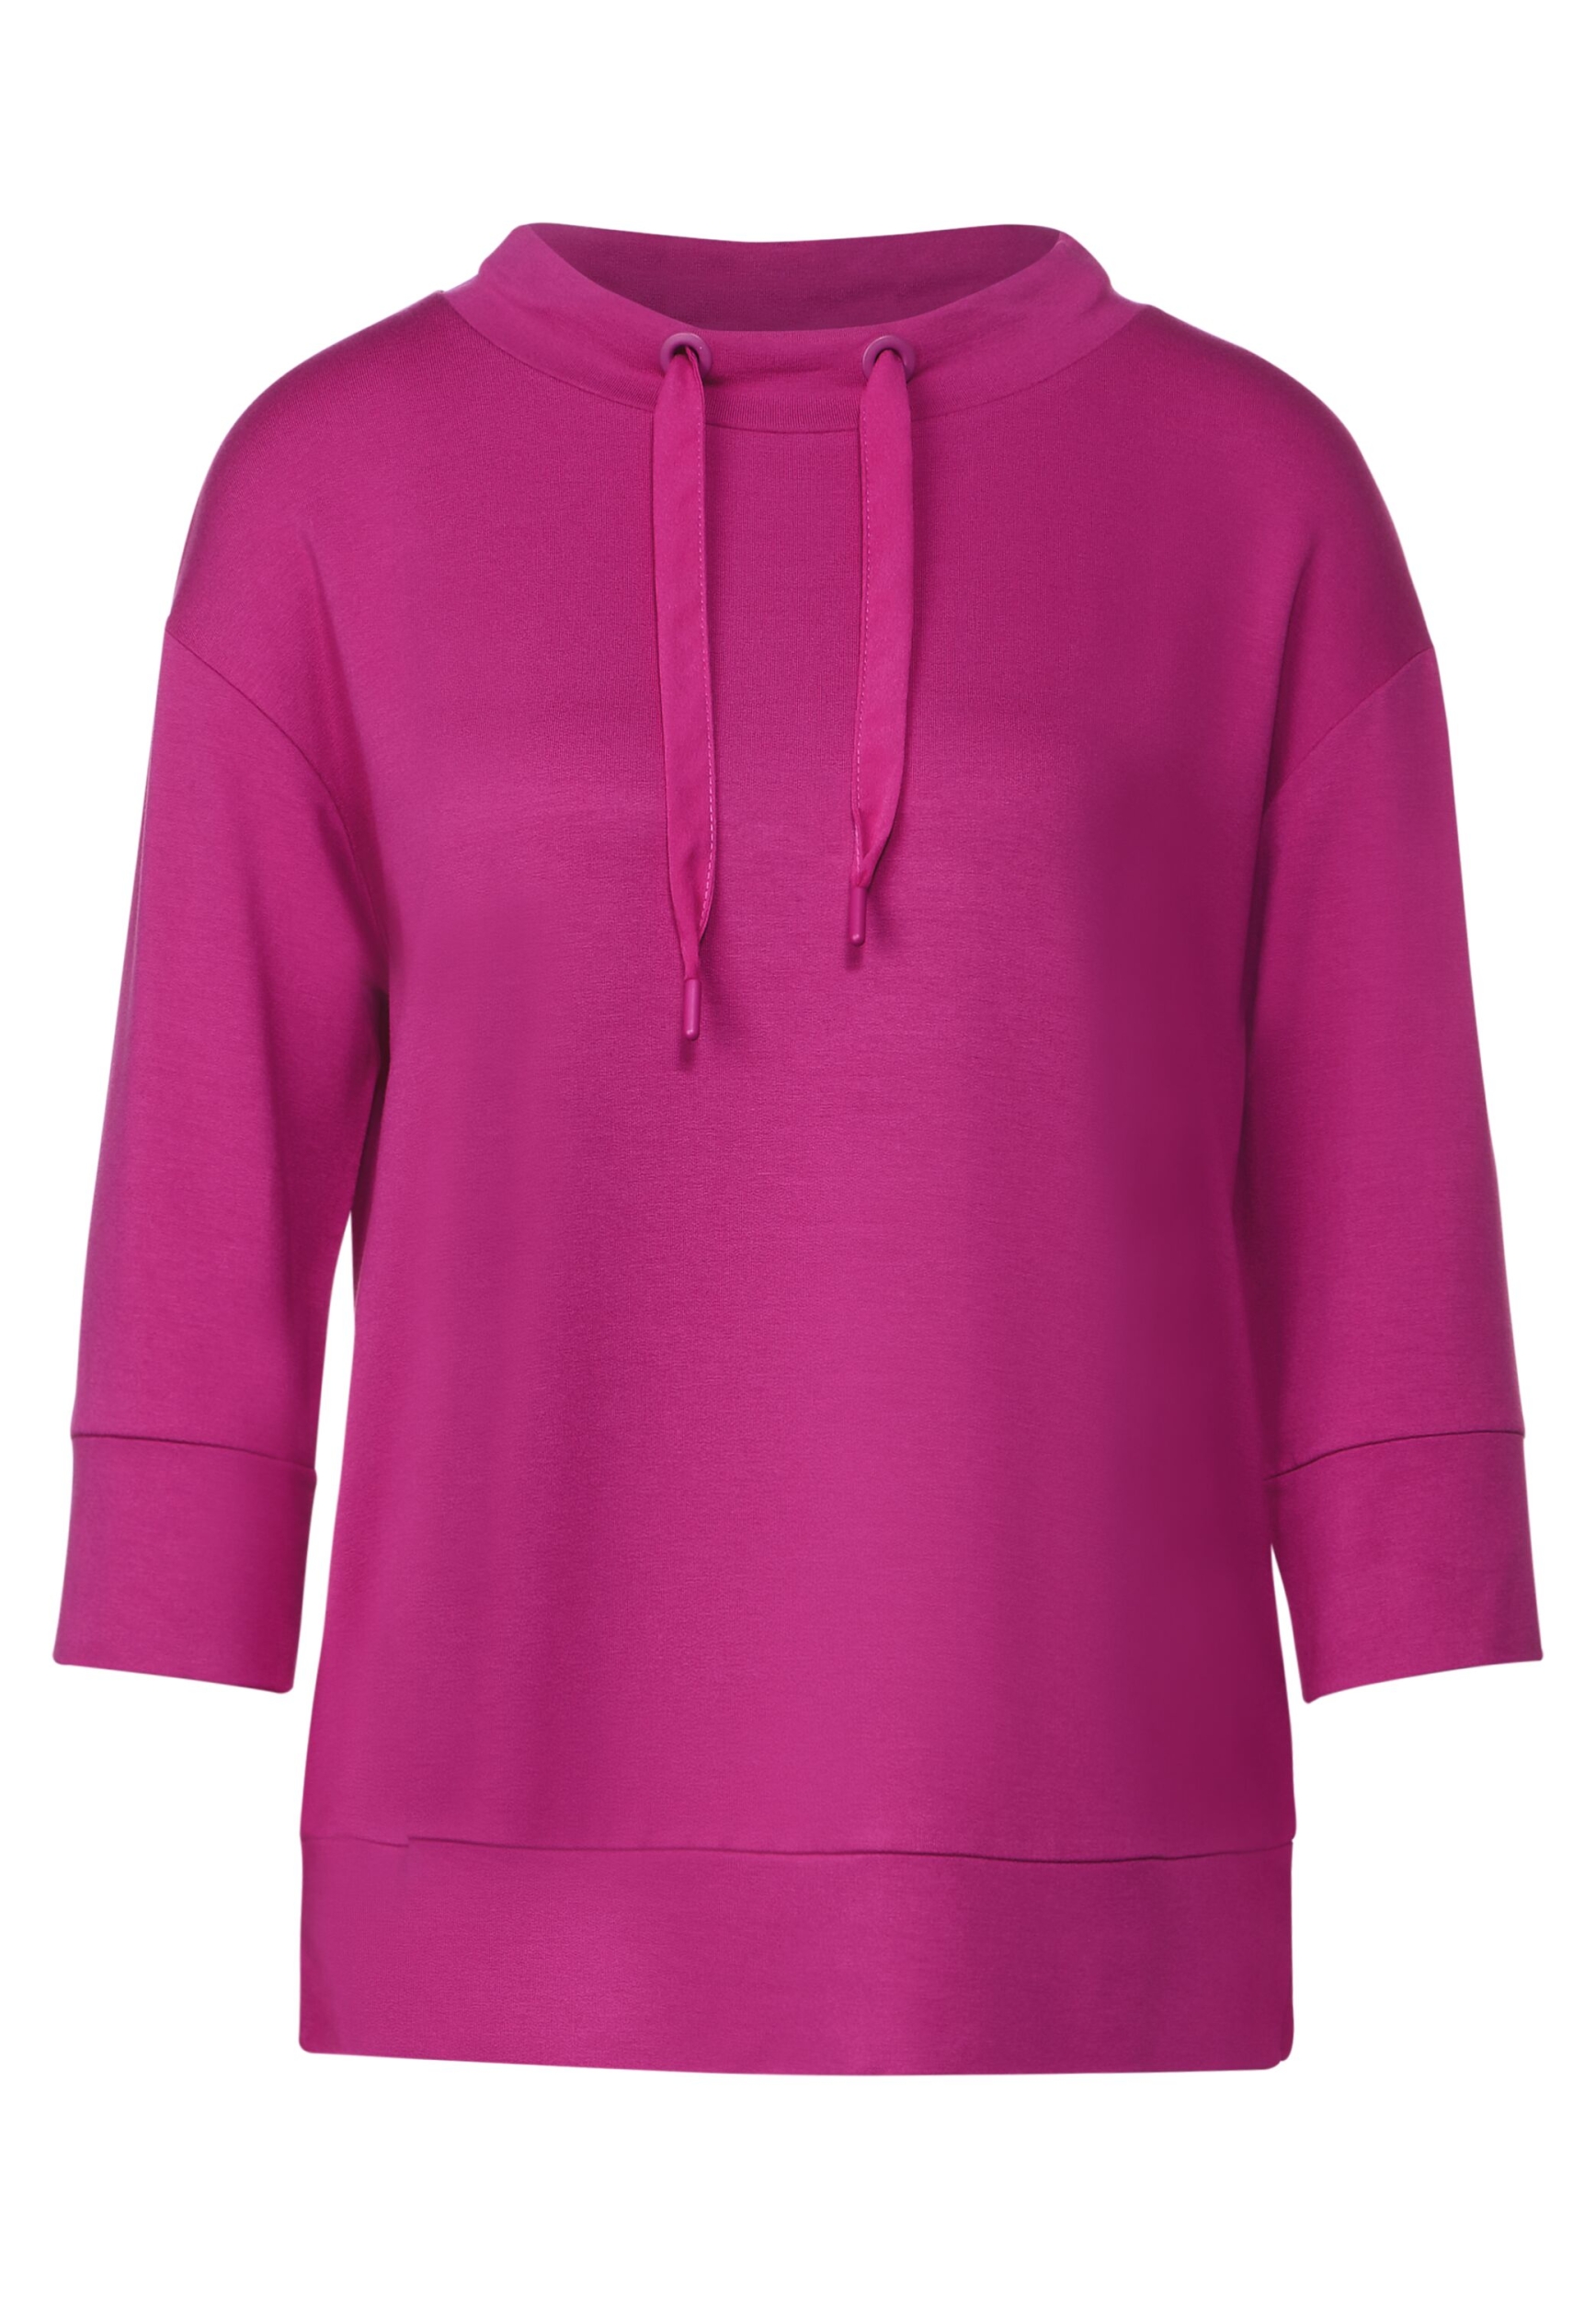 soft oversize shirt w.loops | 44 | bright cozy pink | A320776-15463-44